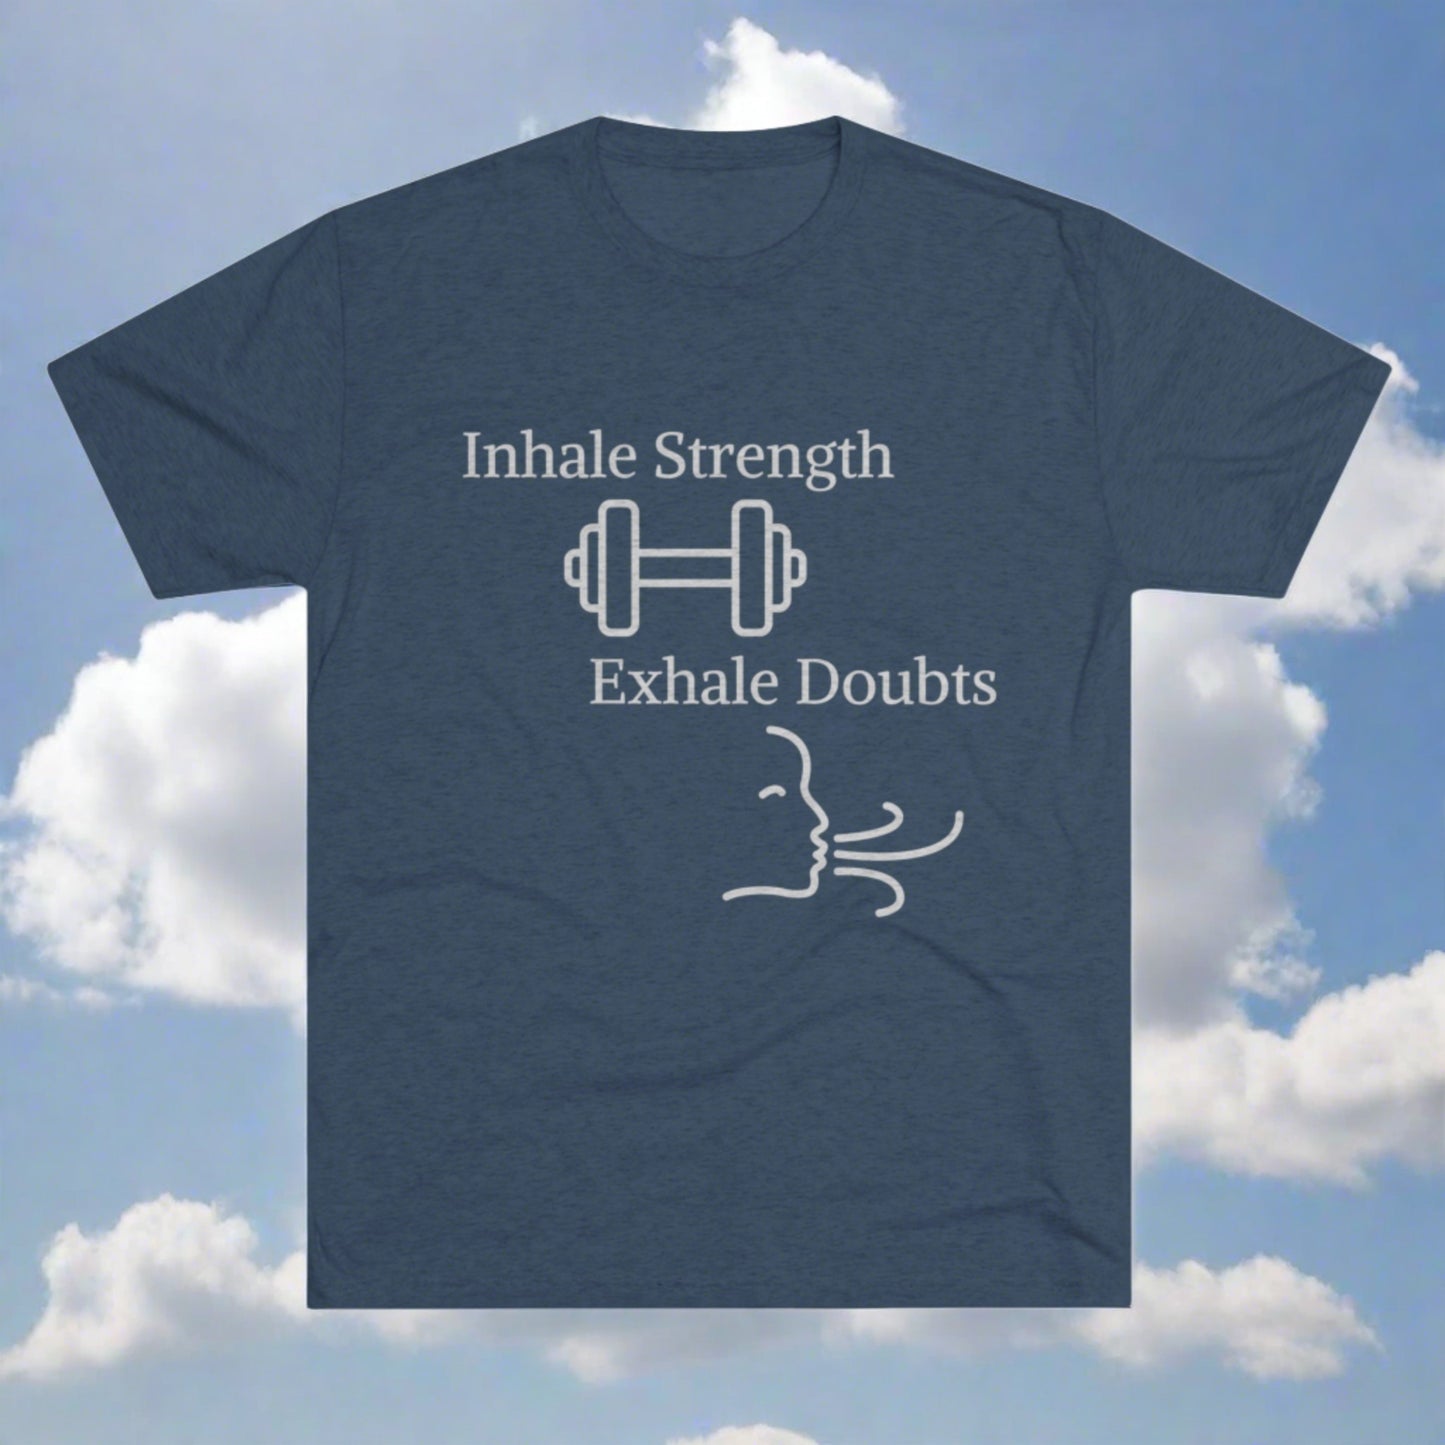 A gray motivational Printify T-shirt with the brand name "Inhale Strength Exhale Doubt w Images" in white text, featuring a dumbbell image and a simple drawing of a face exhaling, set against a blue sky